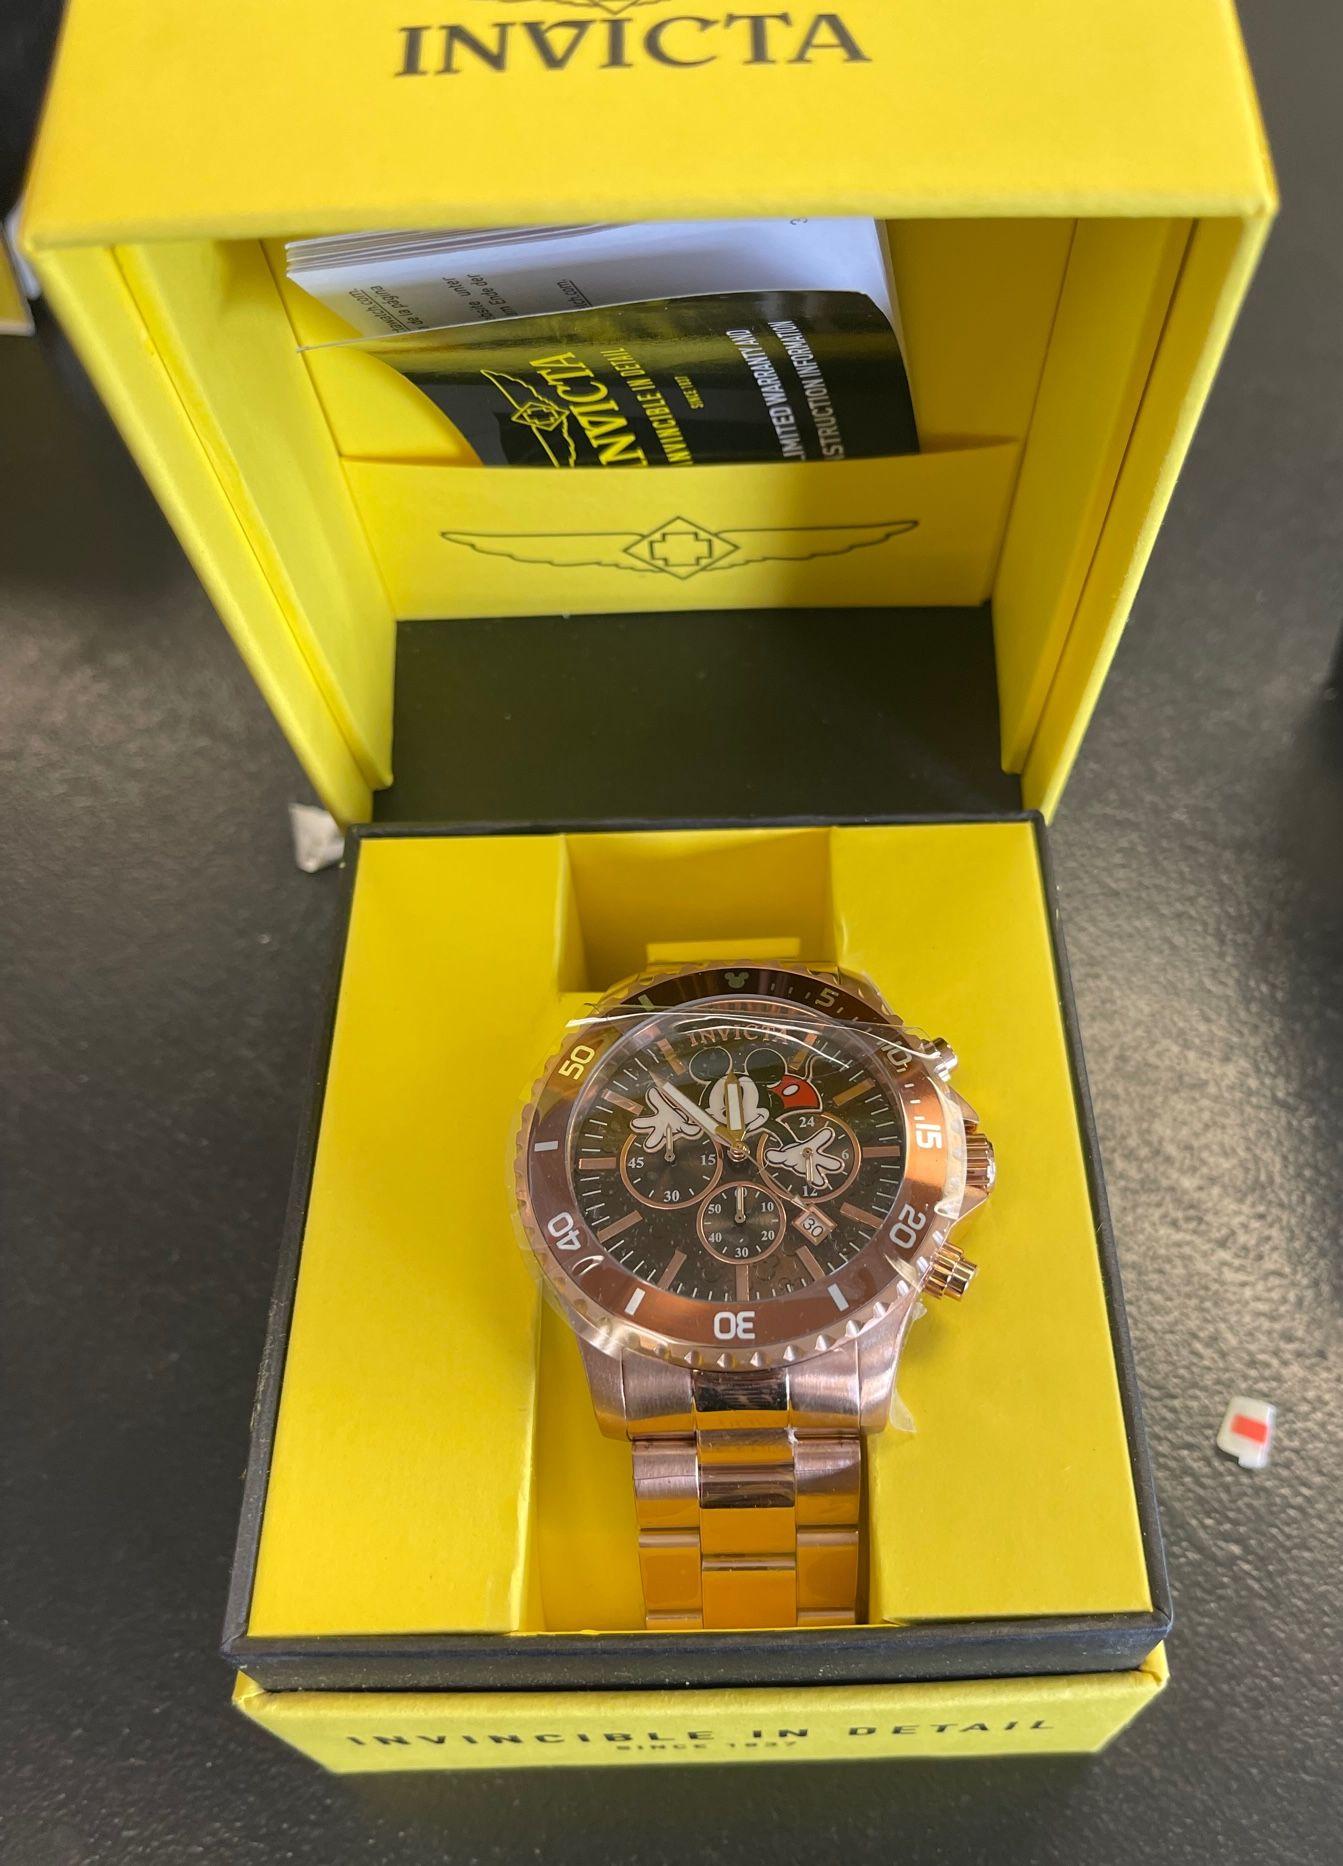 Simply Fabulous! Gent's Walt Disney Rose Gold Wrist Watch featuring that all-time lovable Walt Disney character Mickey Mouse. NIB. Classic Disney Design. Featuring: 12-Hour Dial, Chronograph, Date Indicator, Limited Edition, Luminous Hands, Luminous